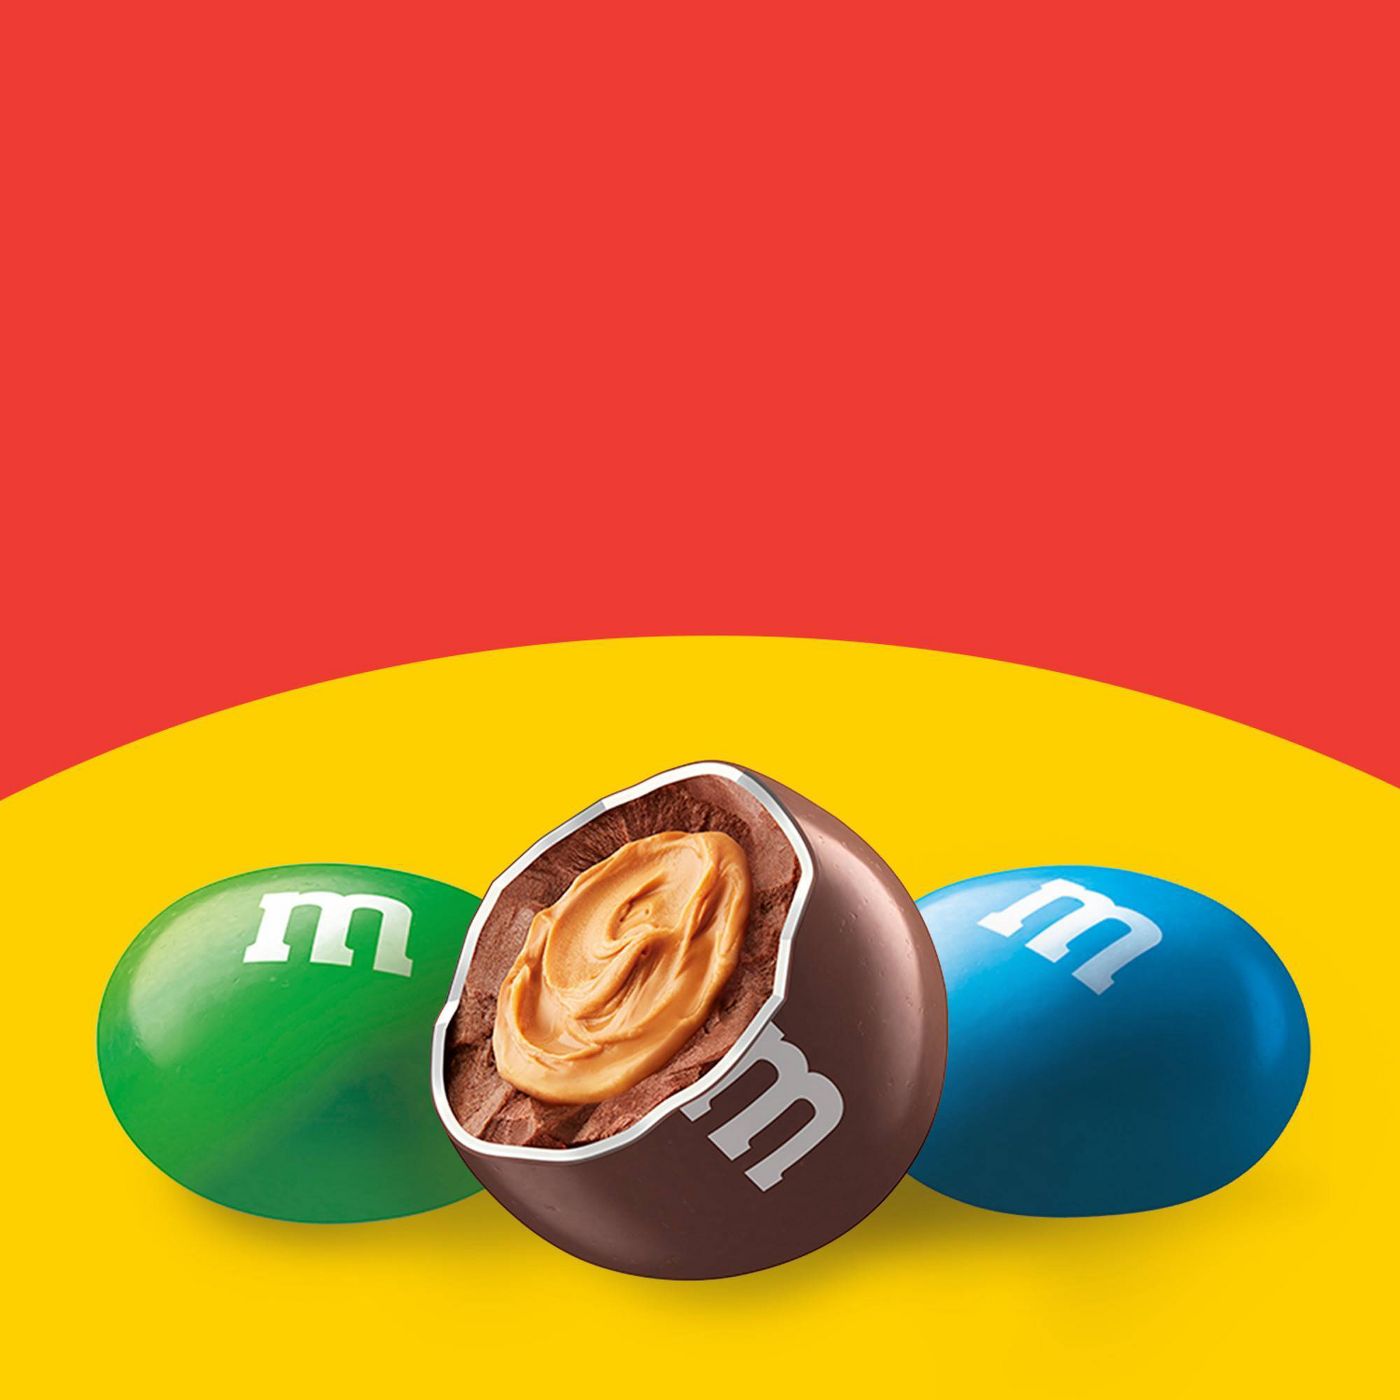 This Is Where to Find M&M's Peanut Butter